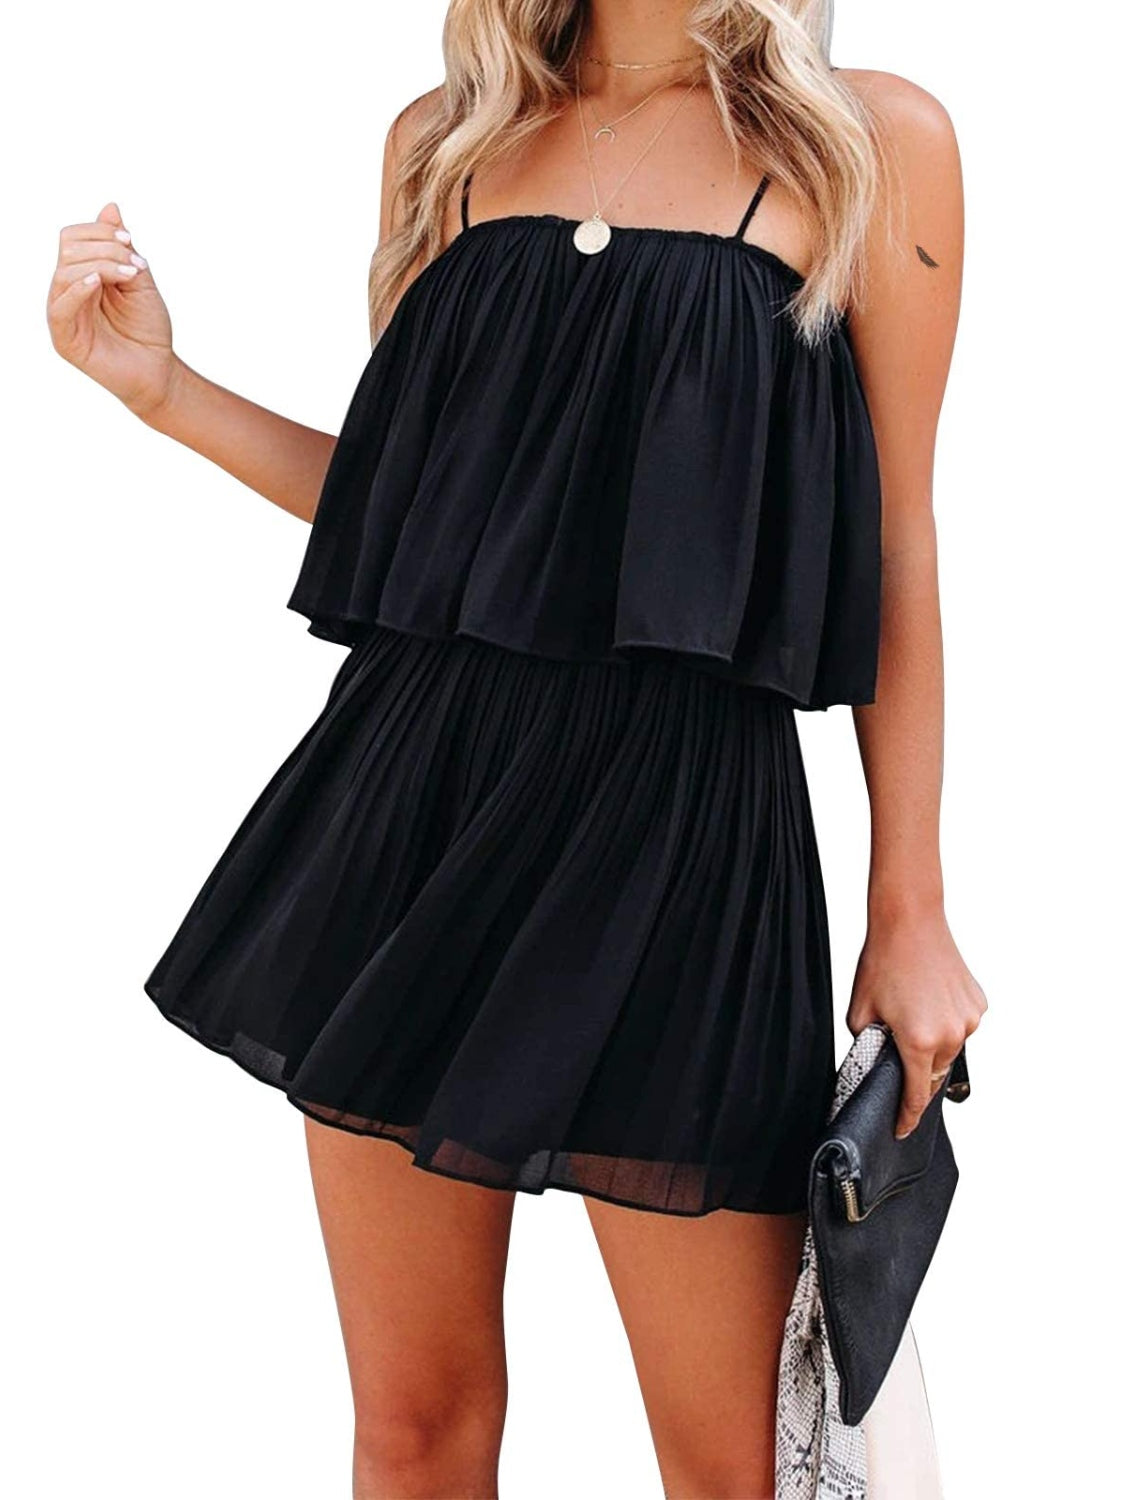 ONLINE ONLY! Ruched Spaghetti Strap Romper